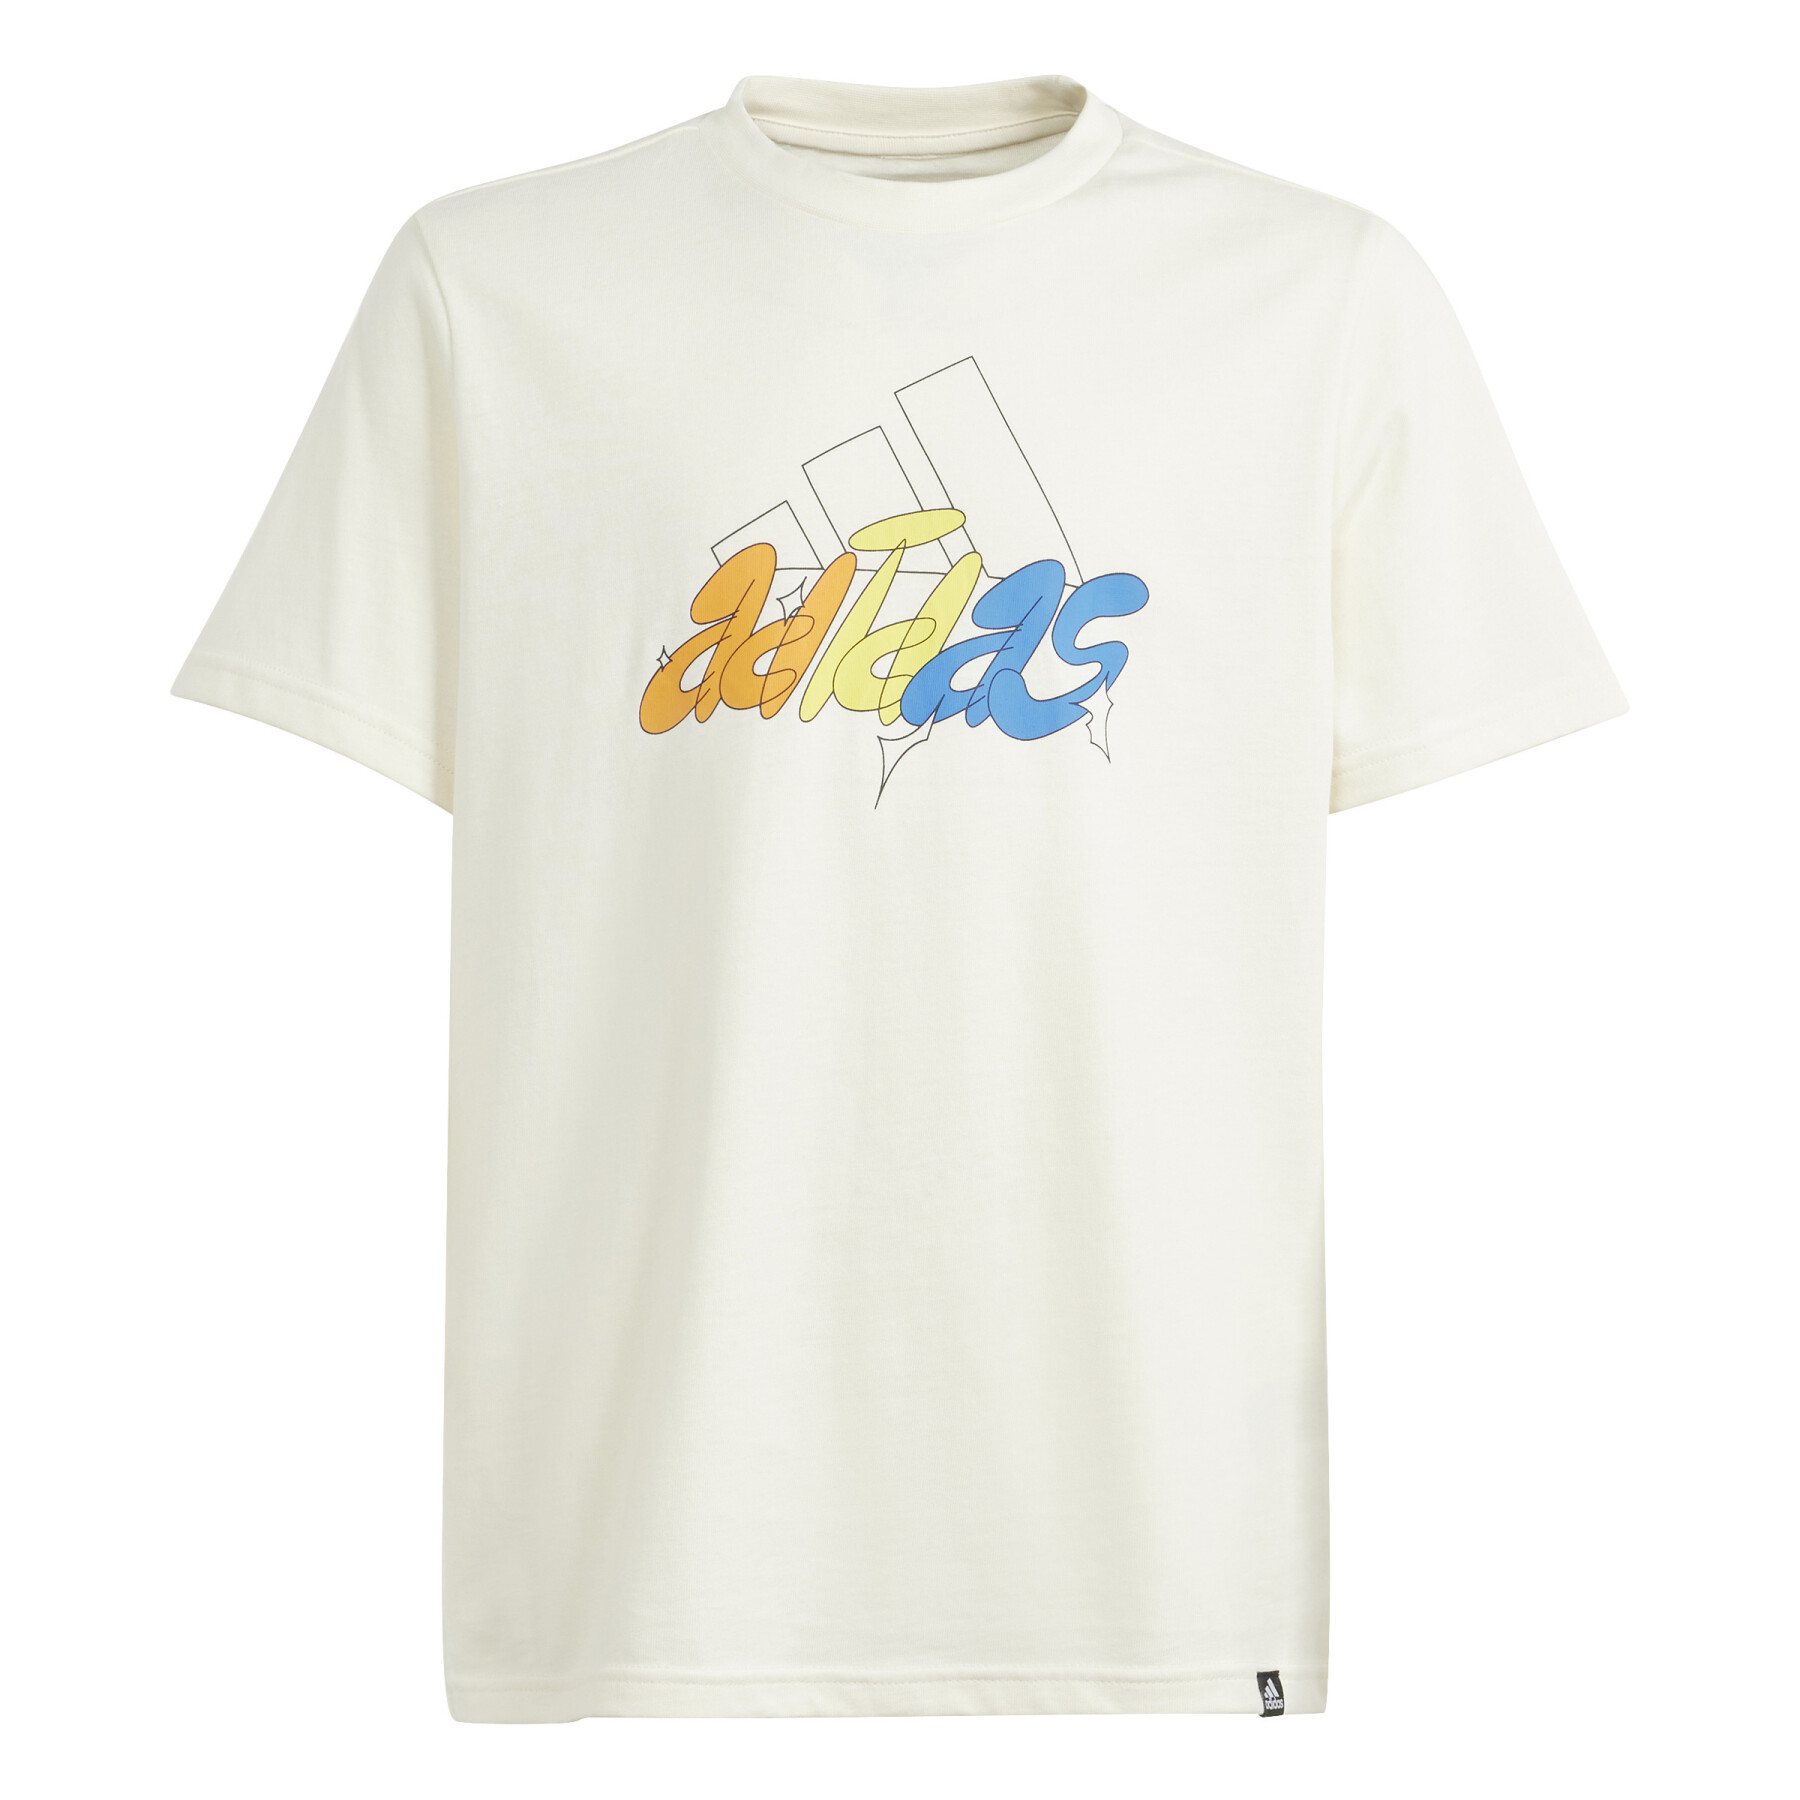 Child's T-shirt adidas Table Illustrated Graphic